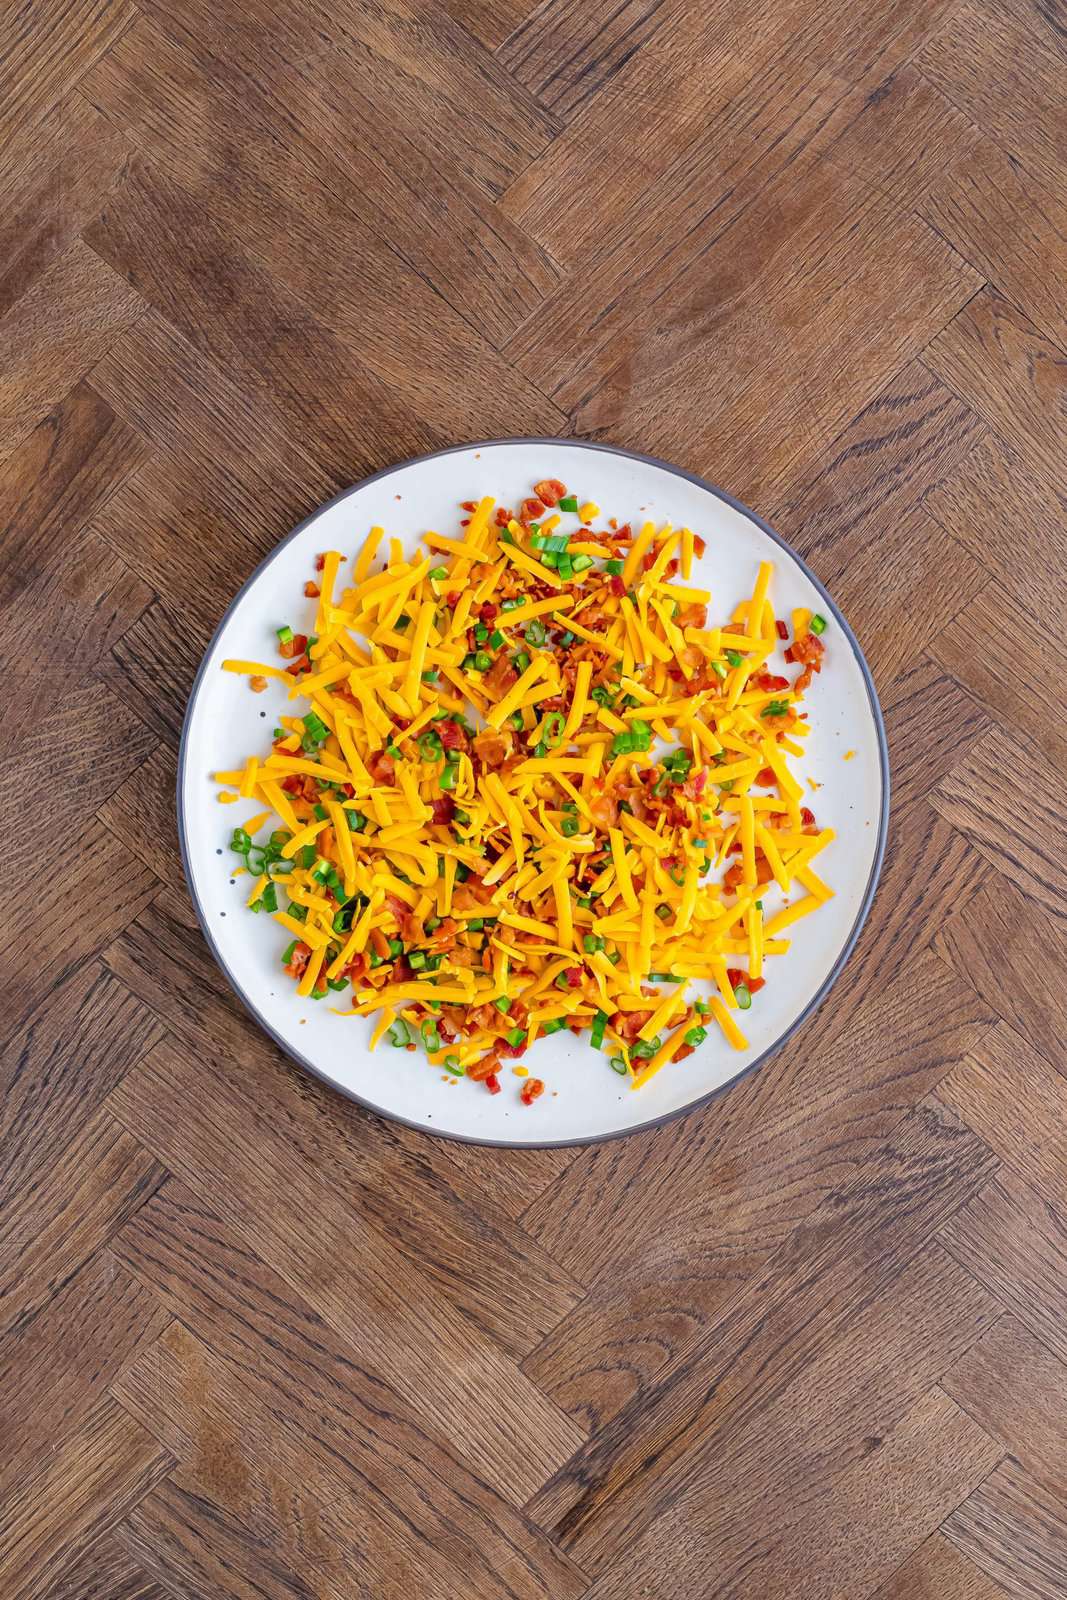 A plate of chives, shredded cheese, and crumbled bacon.